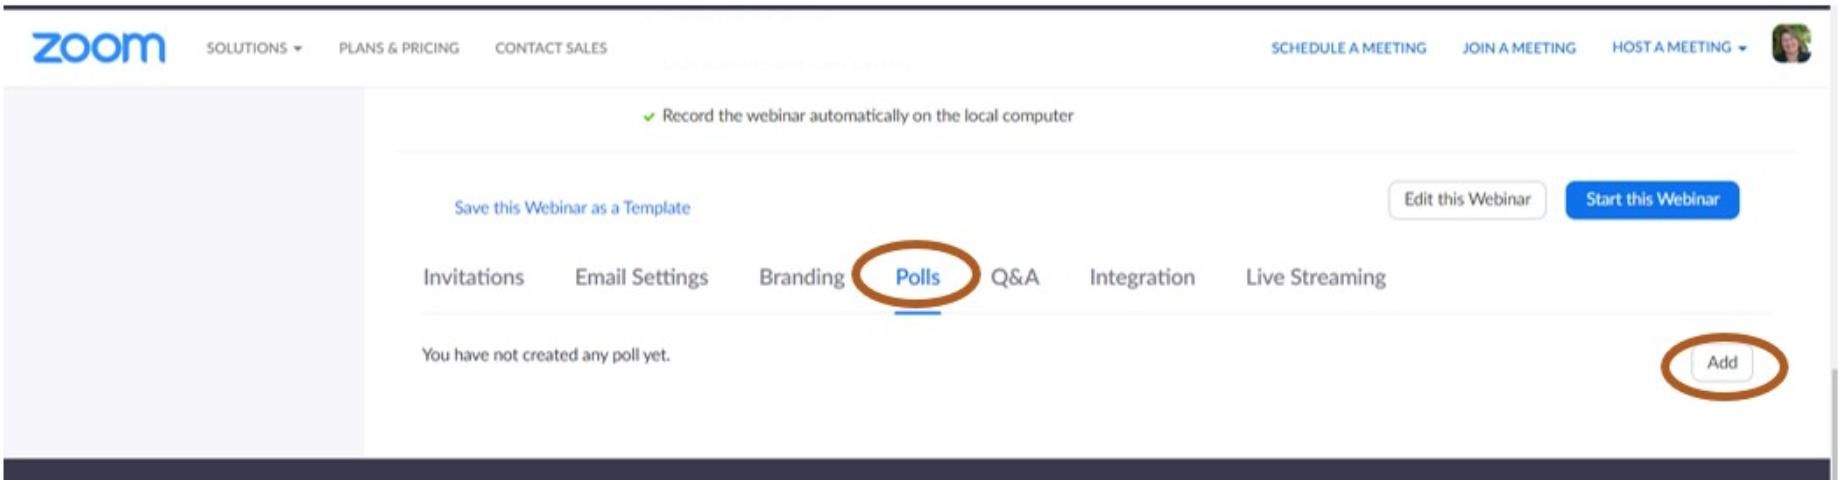 Figure 4. The poll tab is used to set up poll questions and answers. Note that in Zoom Meeting the options to the right of Polls are not available.